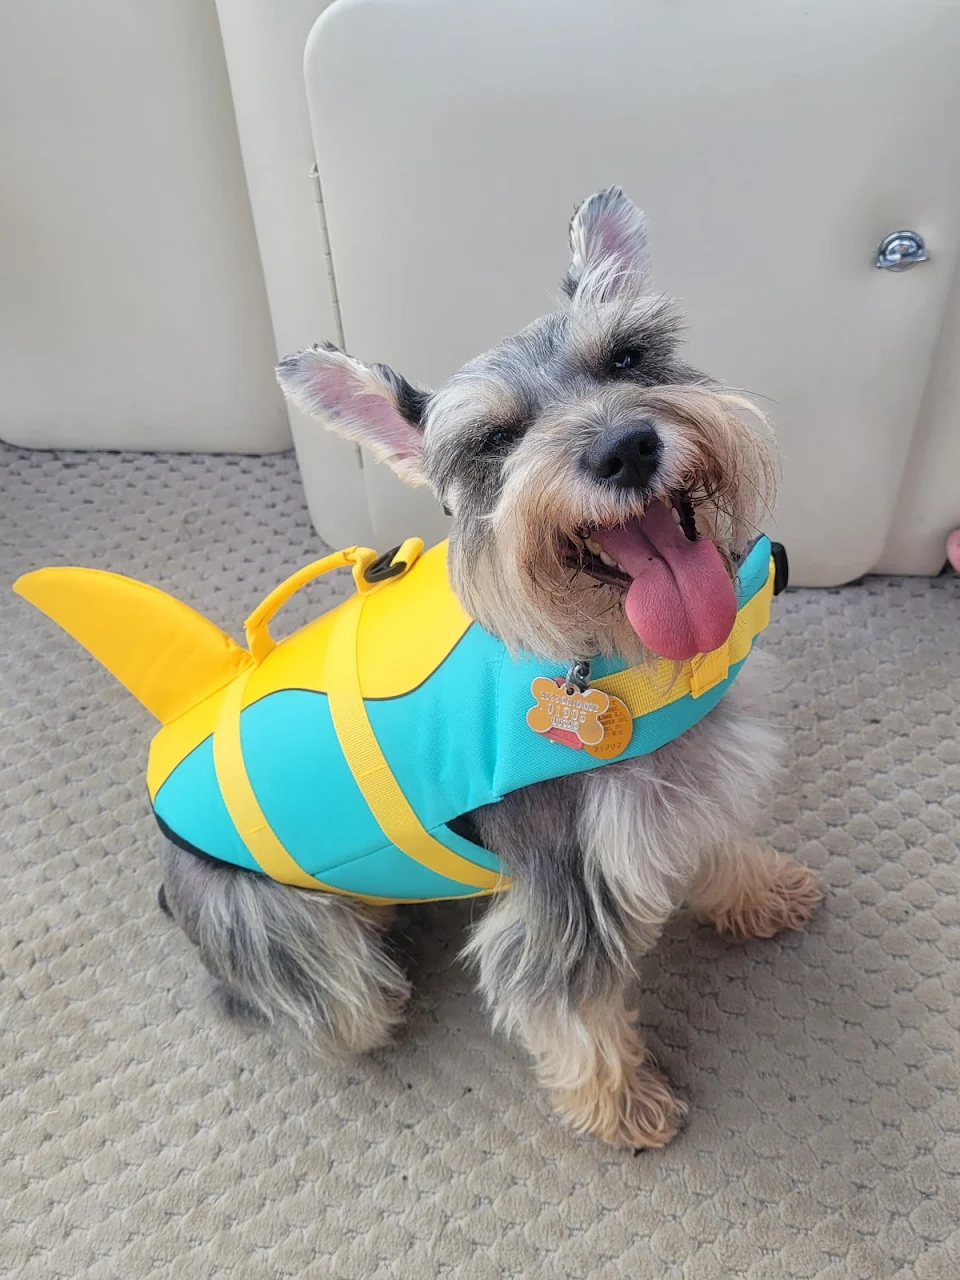 My land shark having the time of her life on a boat...